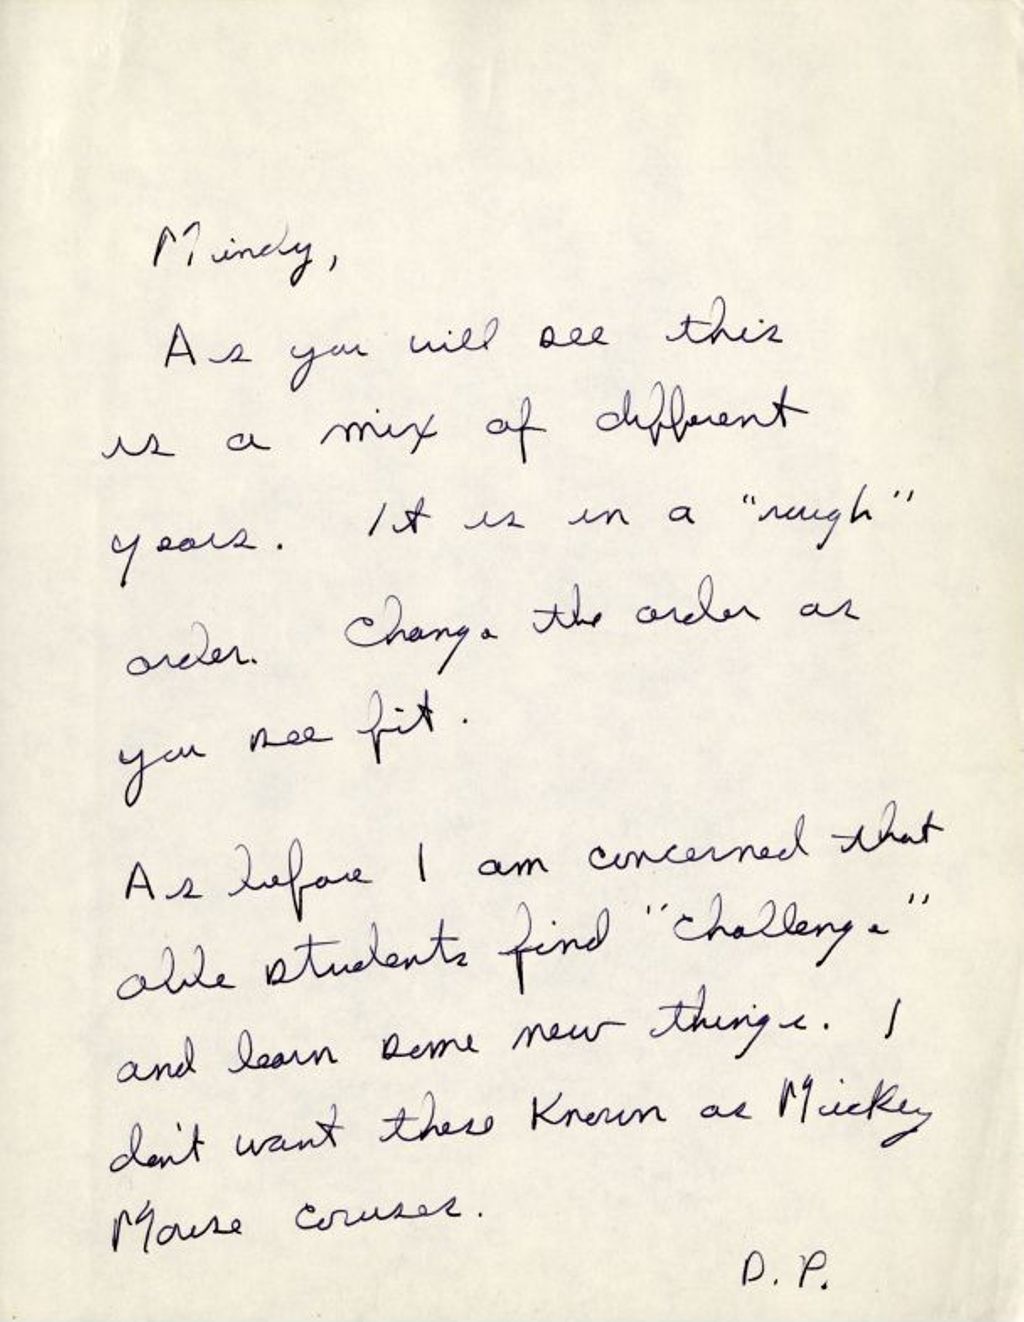 Miniature of Note from DP to Mindy